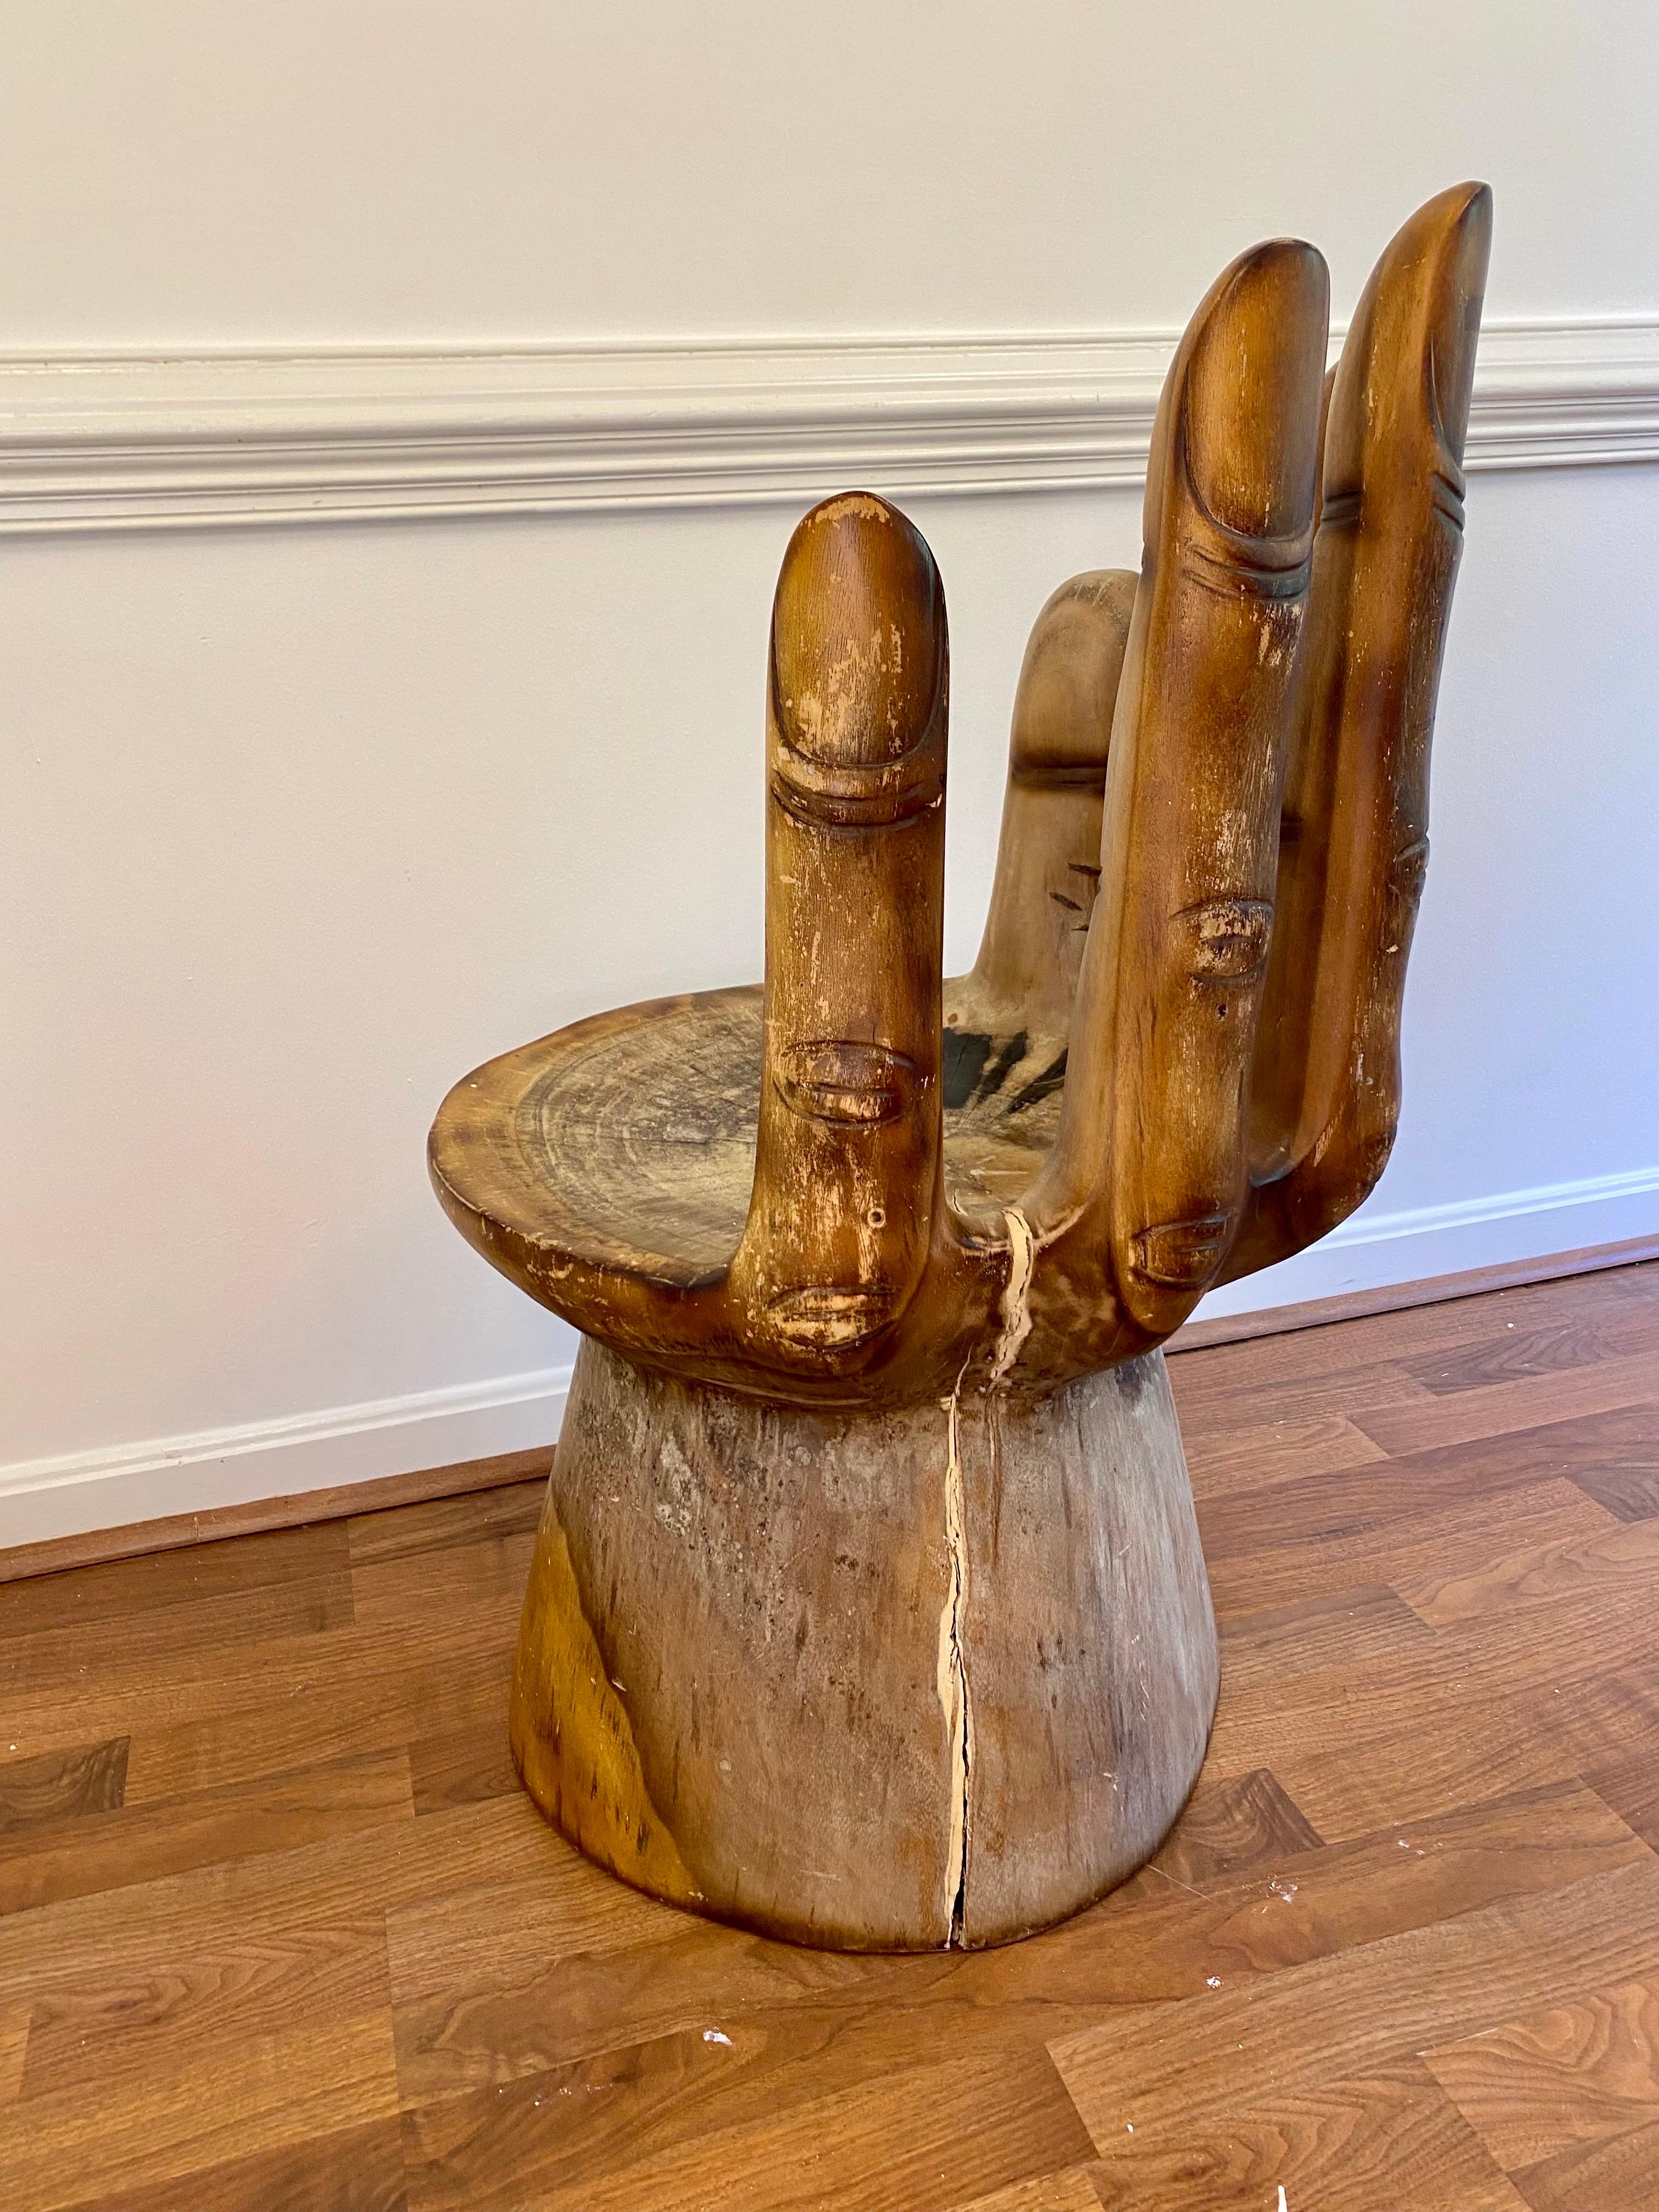 Beautiful wood hand motif sculpture chair made from a single stump. A true work of stunning craftsmanship, the attention to detail on the fingers and base of this remarkable, one-of-a-kind piece prove it was made with love. Heavy, sturdy and stable—